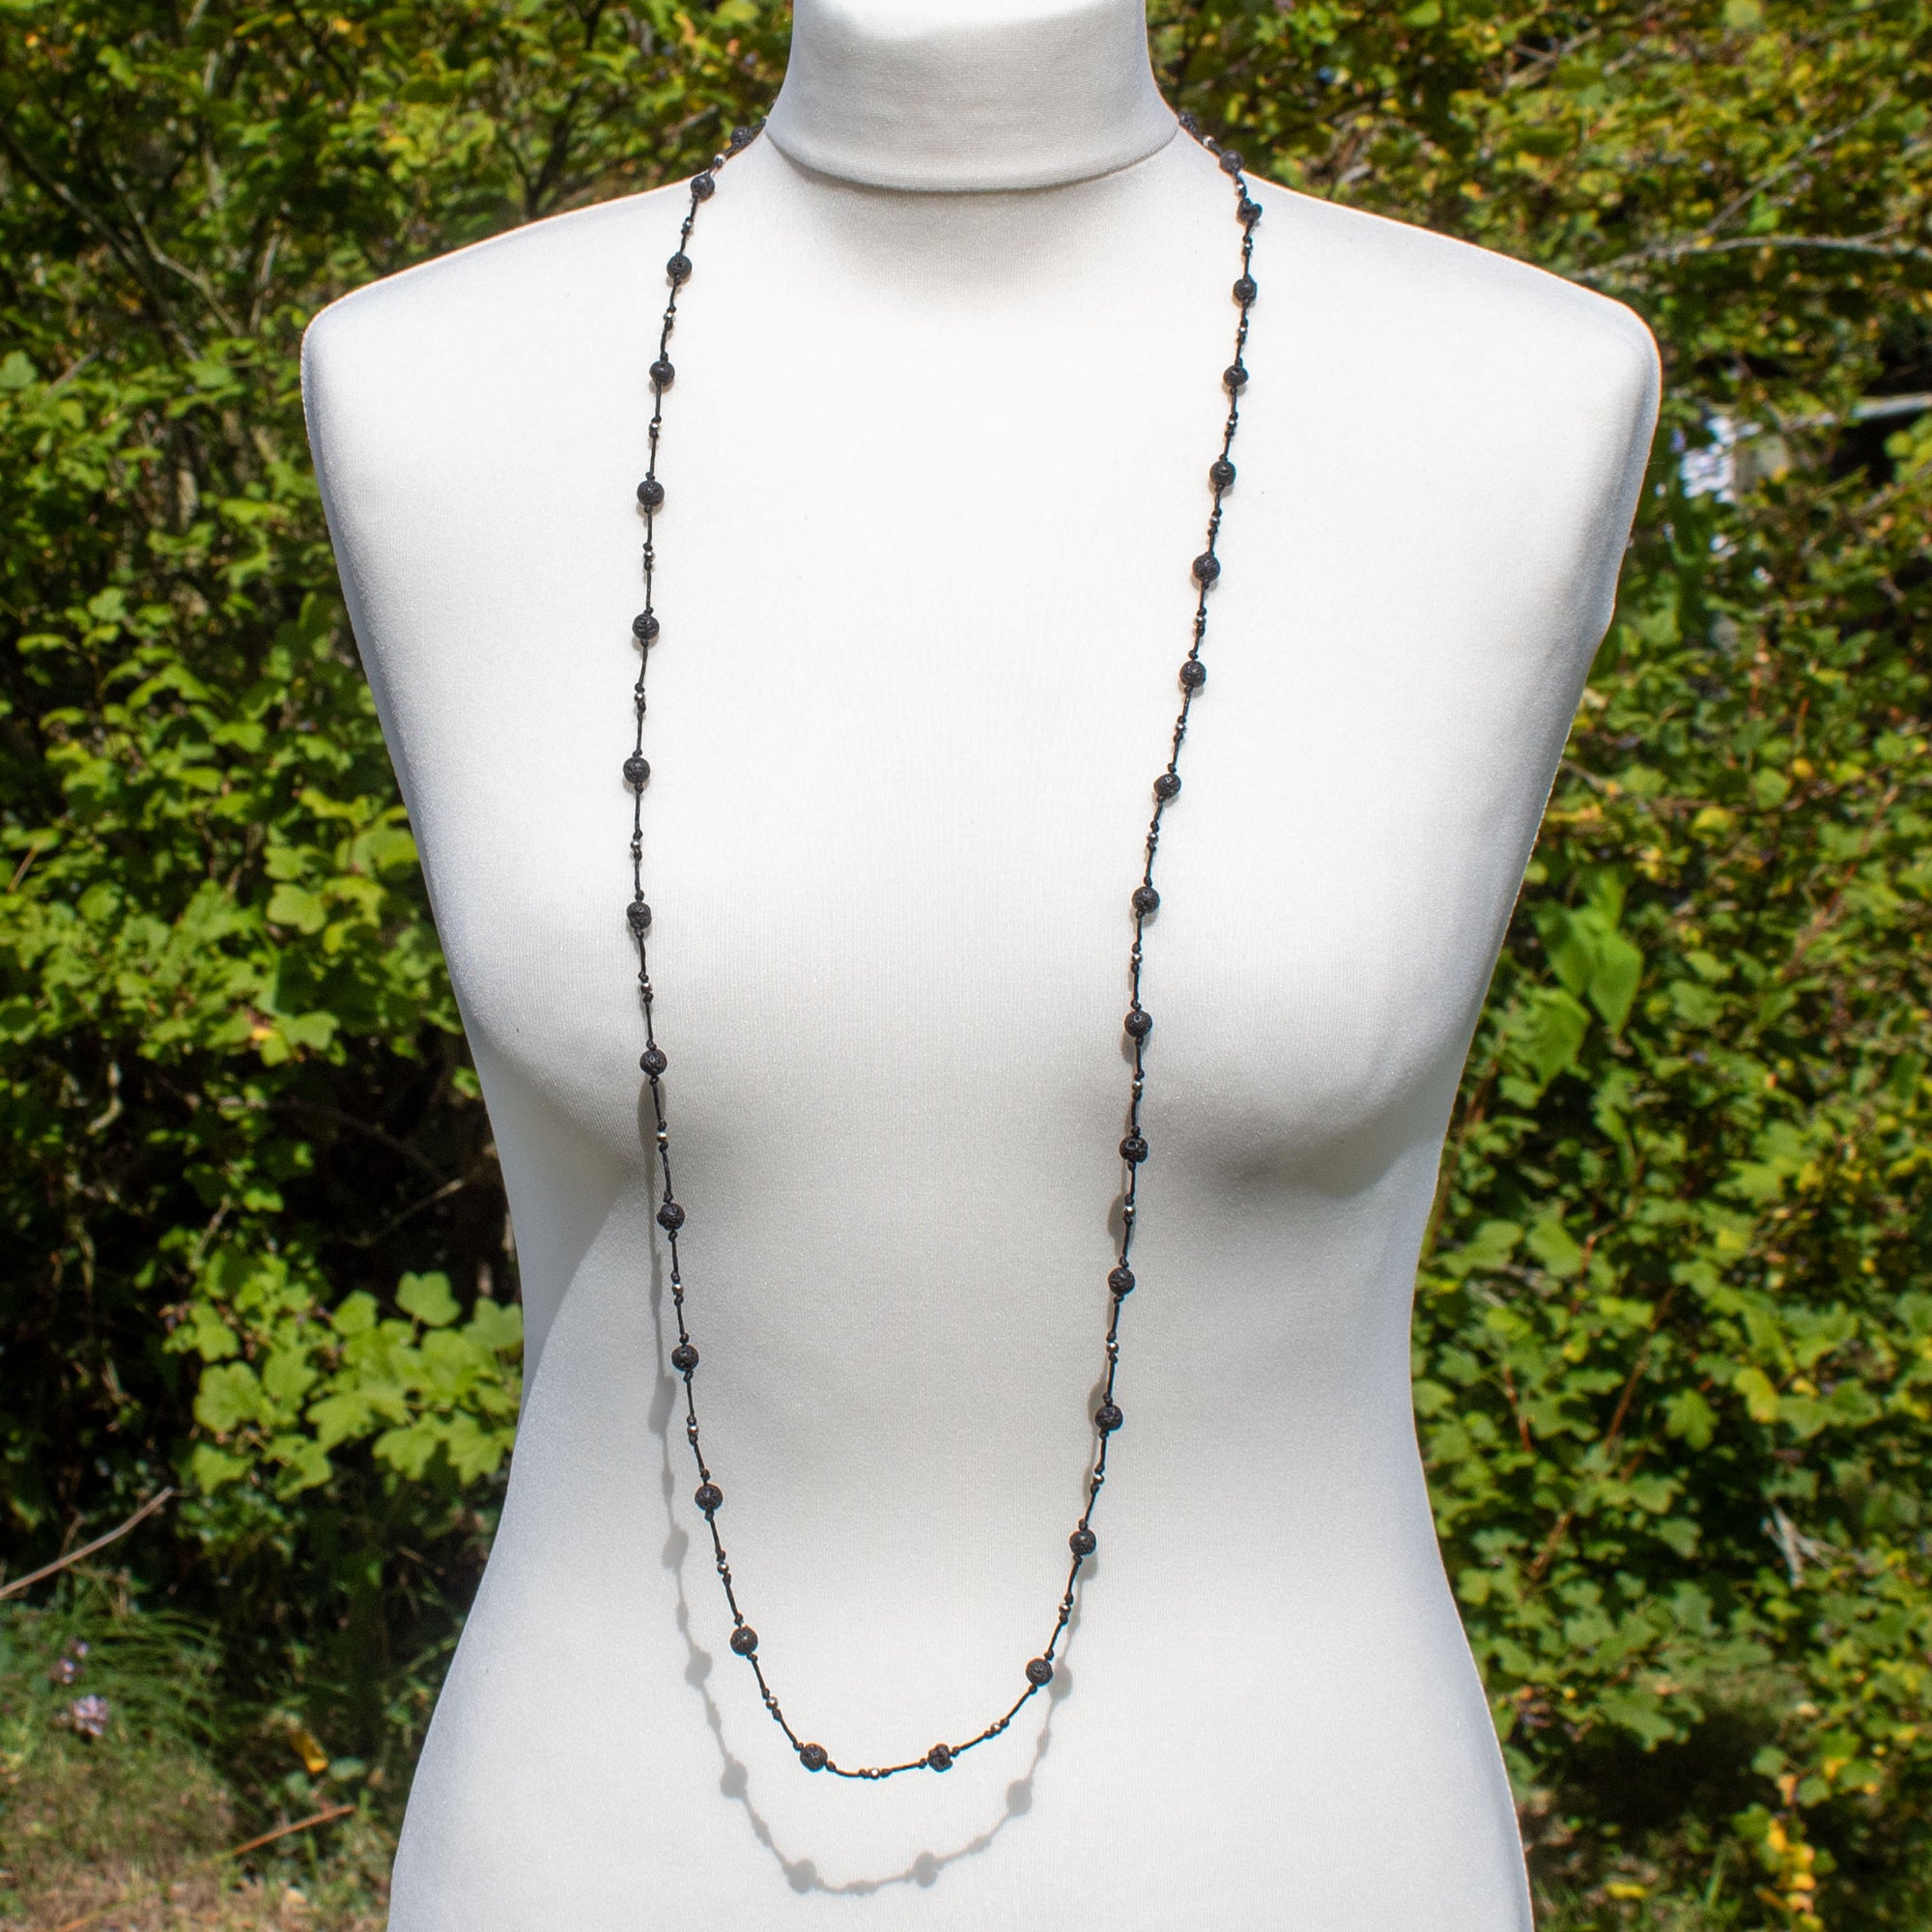 Long Lava Stone Bead Necklace | Necklace - The Naughty Shrew